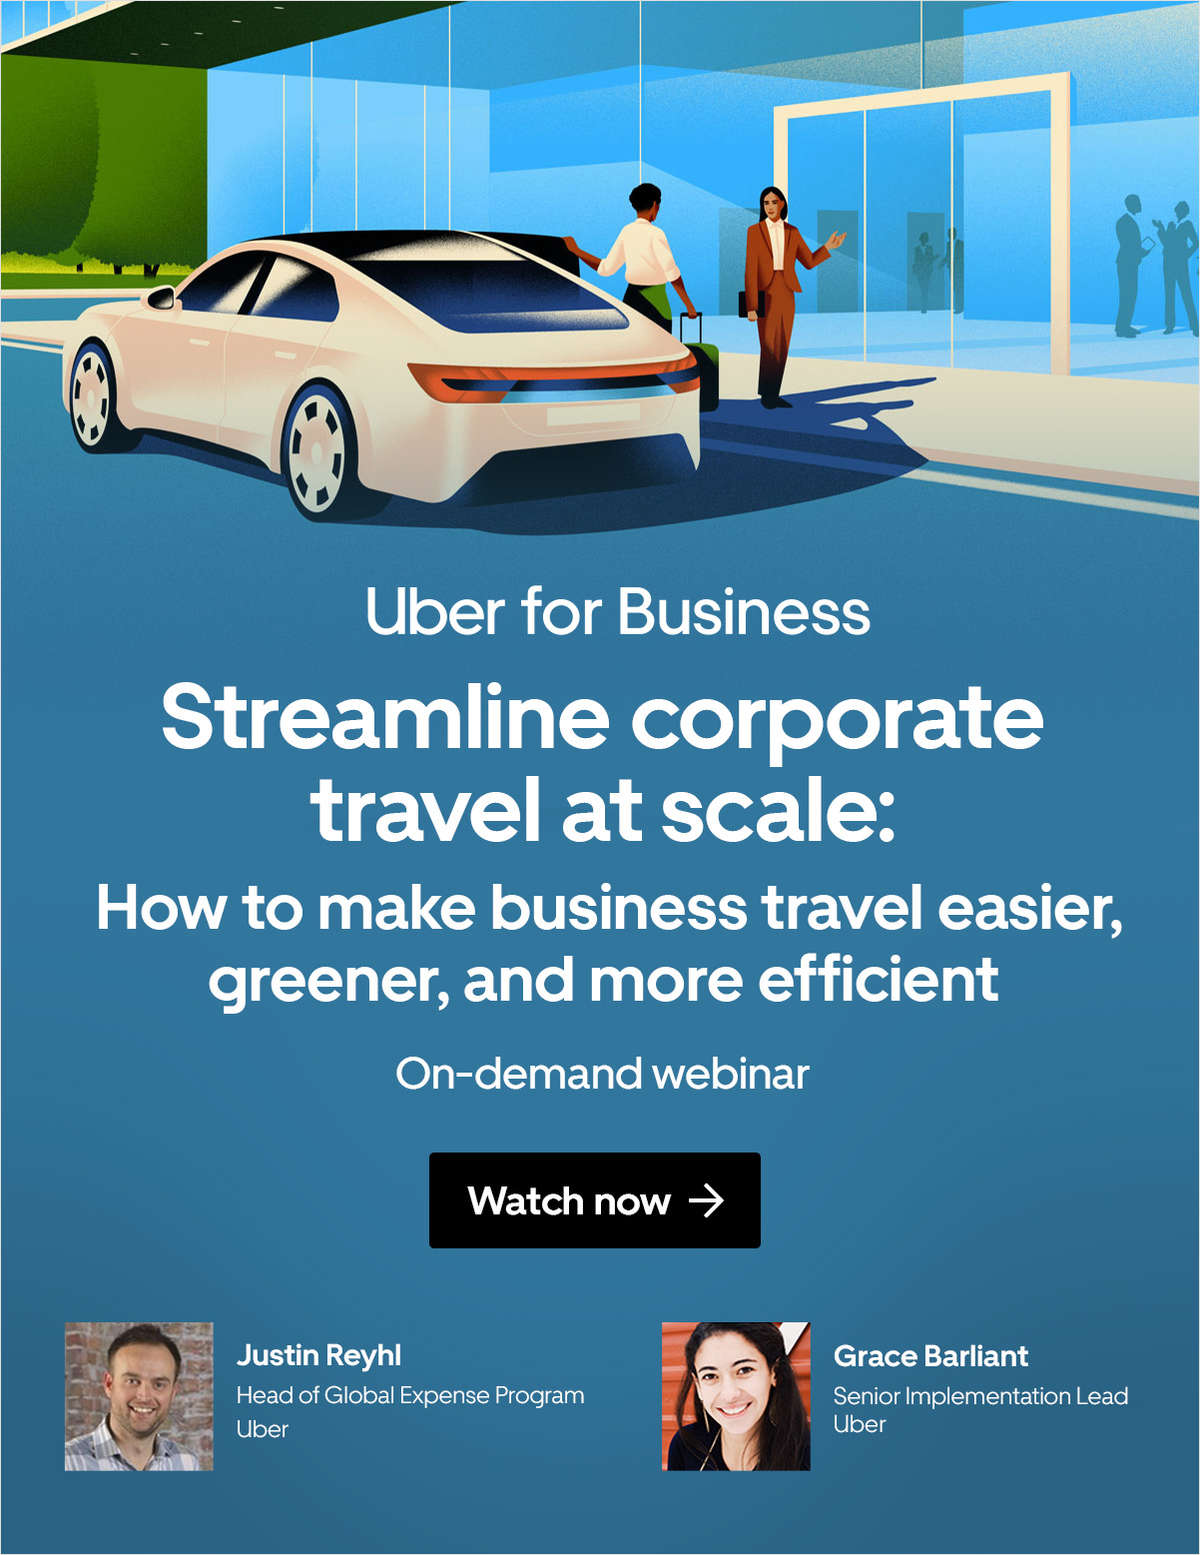 Streamline corporate travel at scale: How to make business travel easier, greener, and more efficient